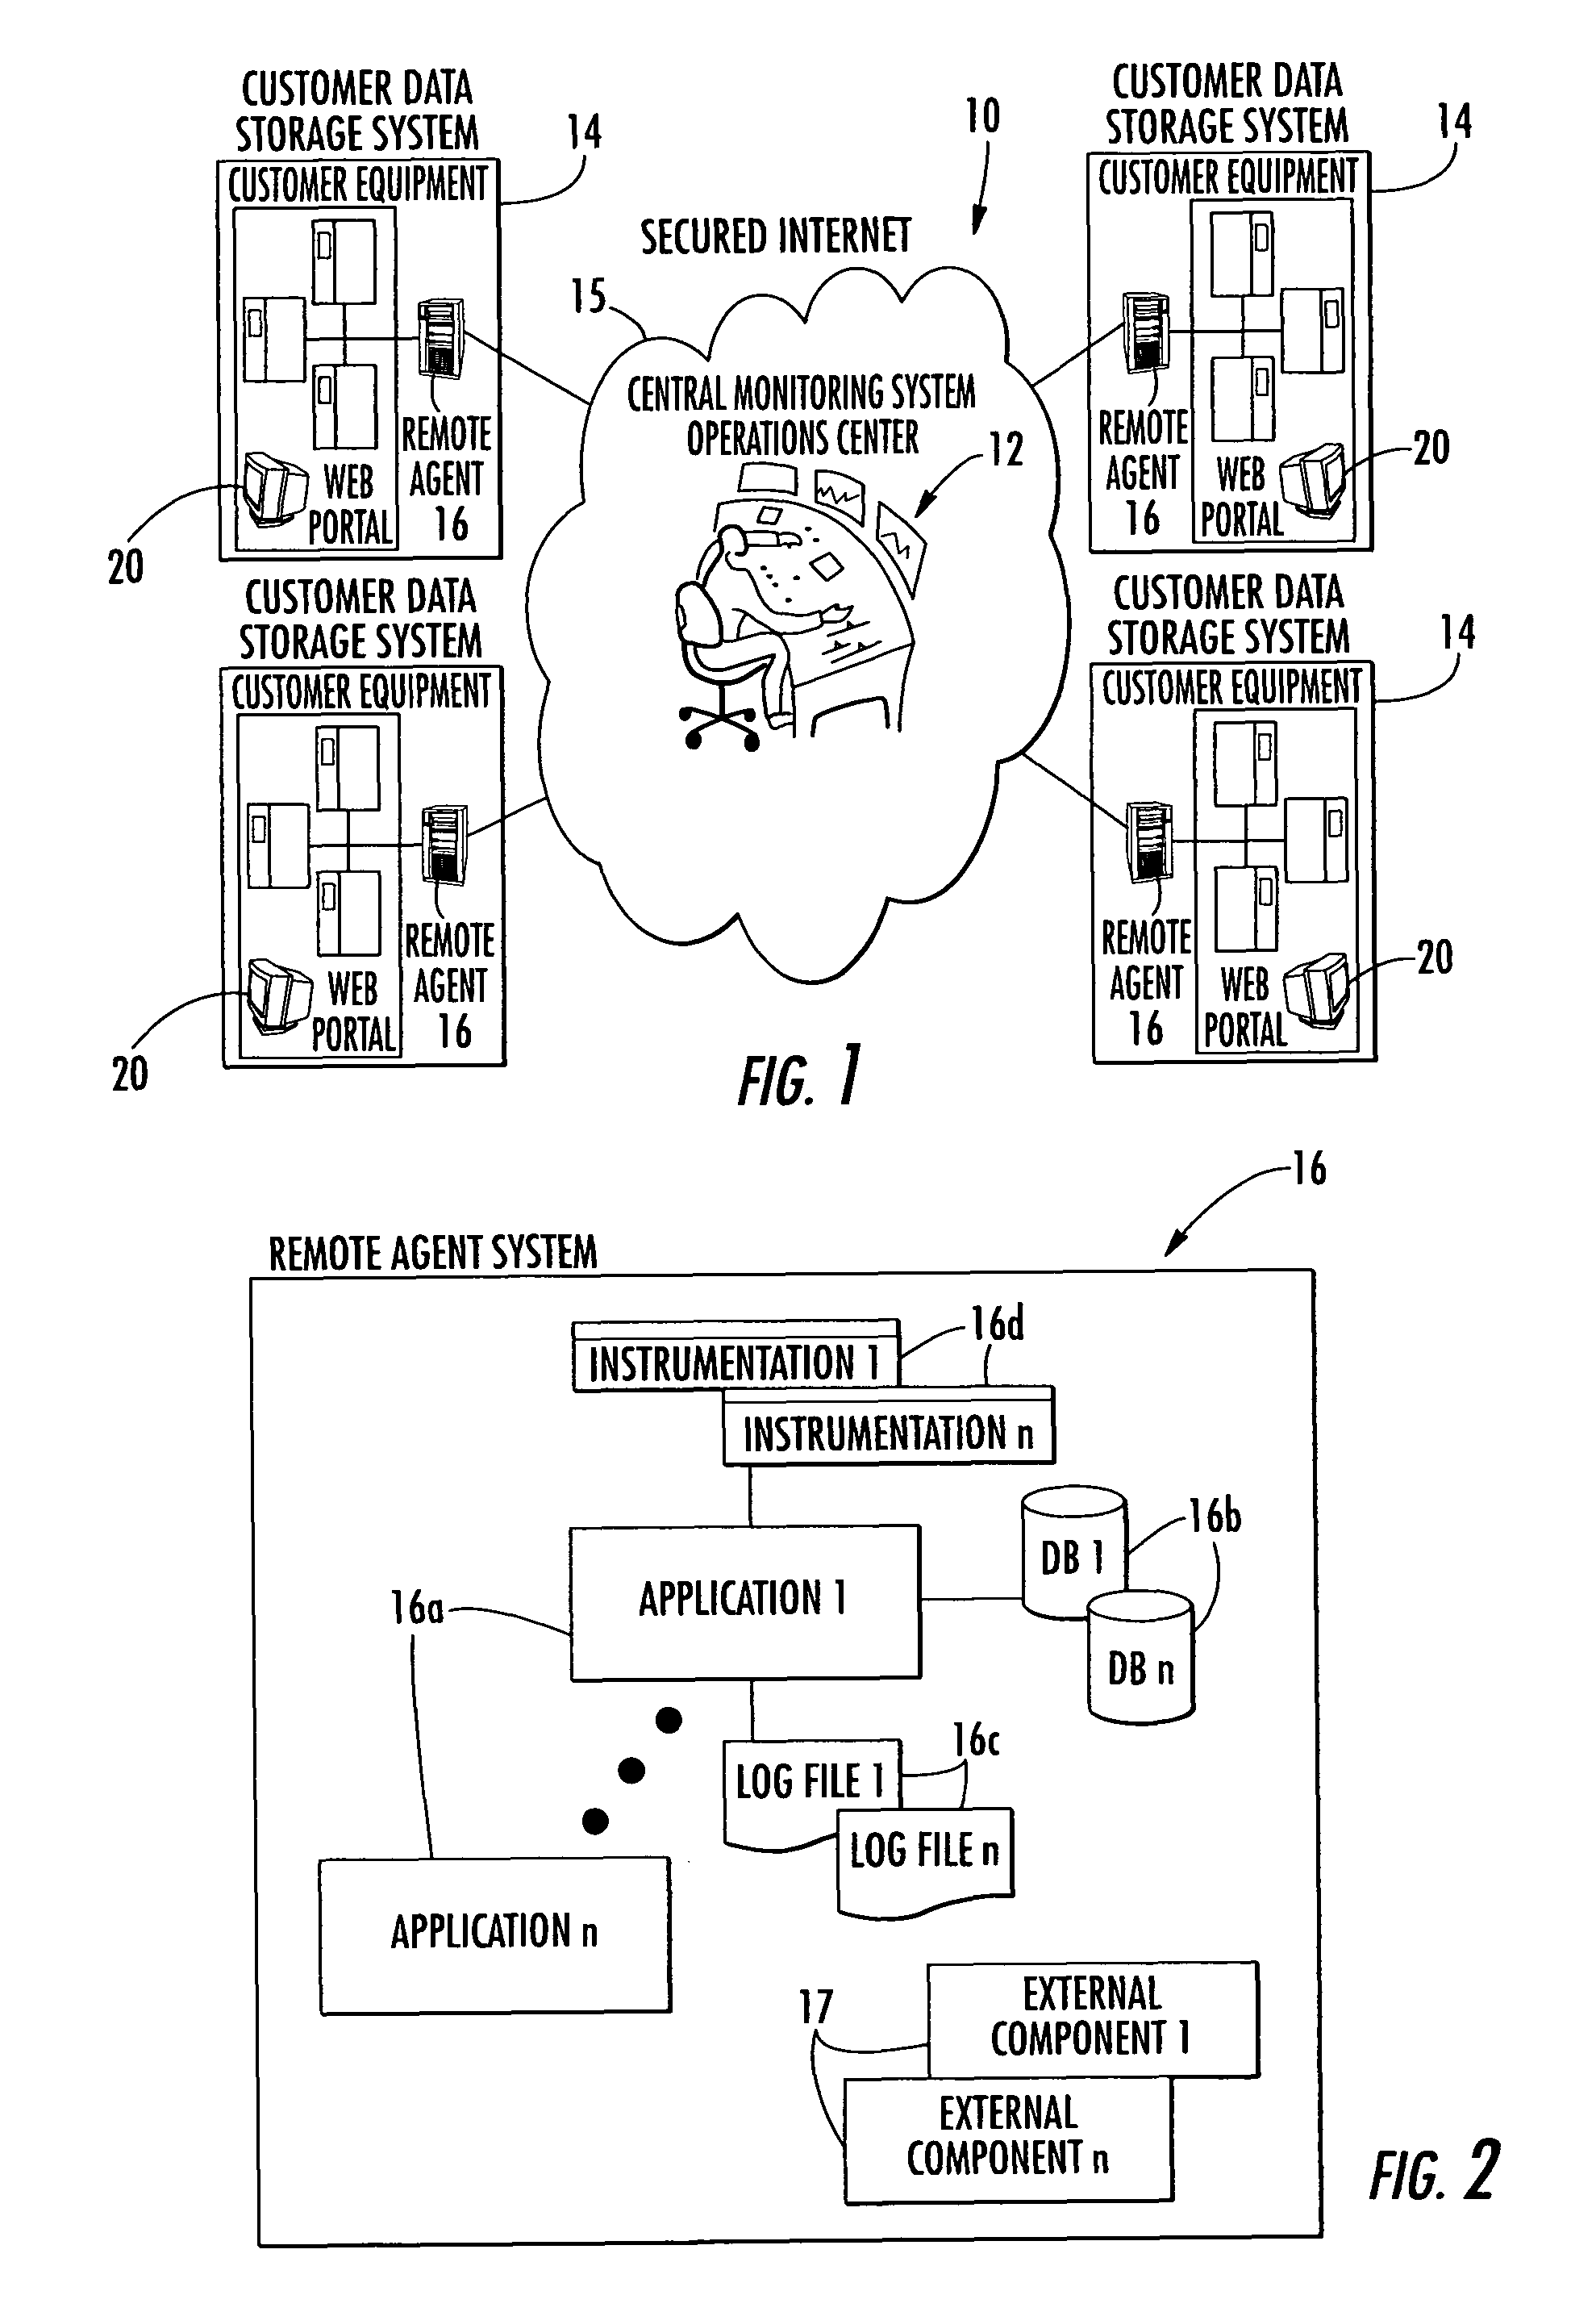 Systems, methods and computer program products for managing a plurality of remotely located data storage systems